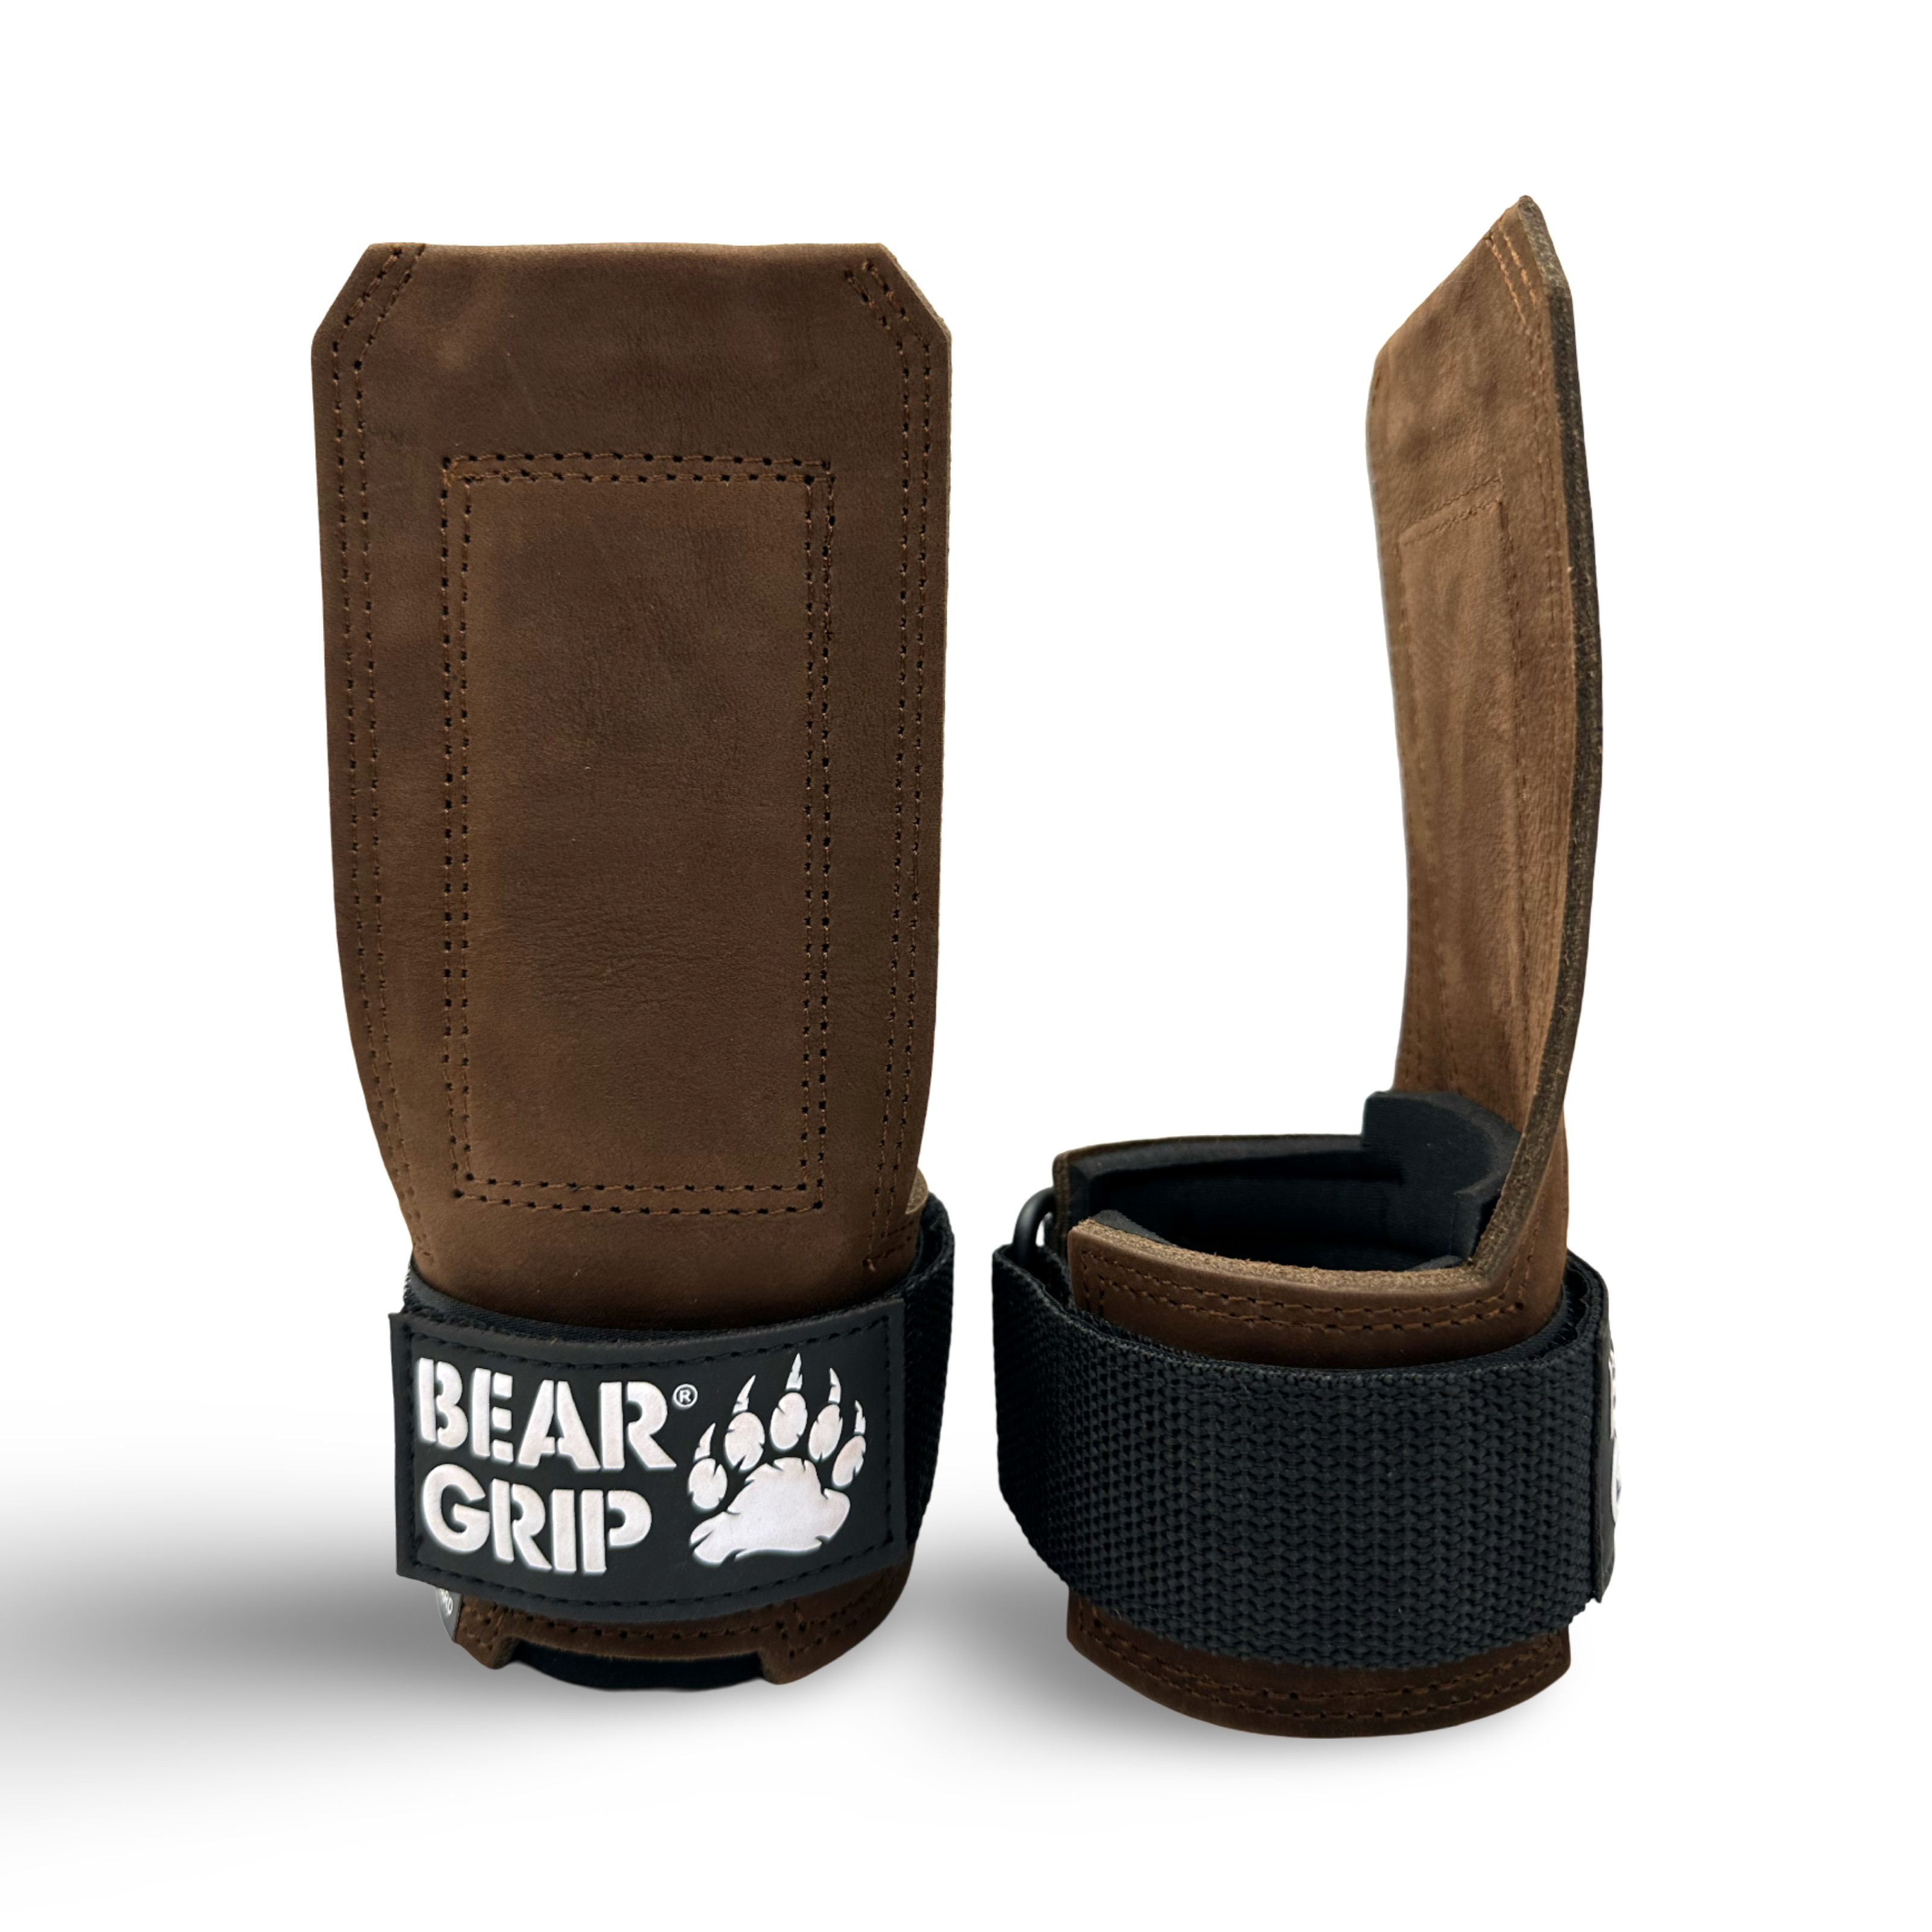 BEAR GRIP® Multi Grip Straps - Heavy Duty Weight Lifting Straps in Black Leather